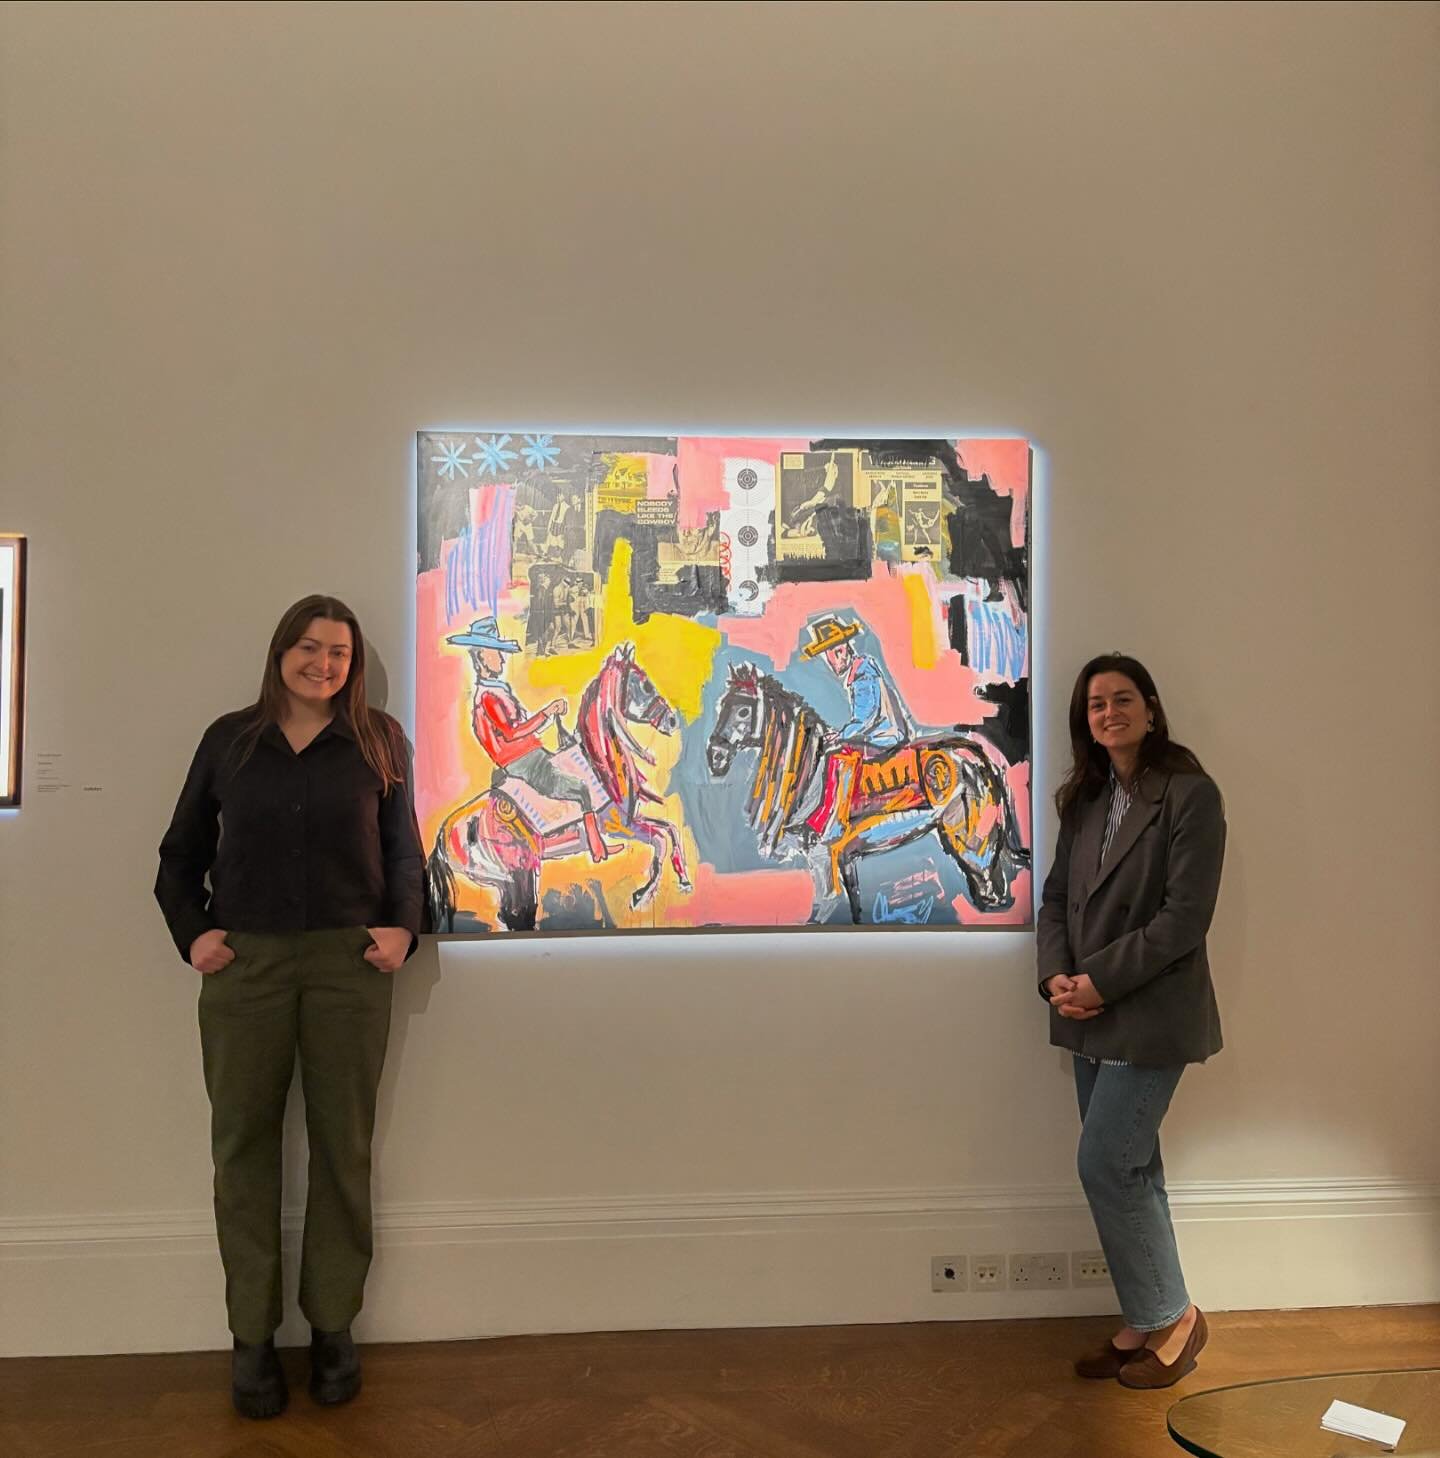 Day 1 of our exhibition at @sothebys 🎨

Thank you Sothebys for hosting our selling exhibition, curated by @sota_marketplace. We had an excellent first day, two pieces sold and much interest on the auction pieces already! 

The exhibition will be on 